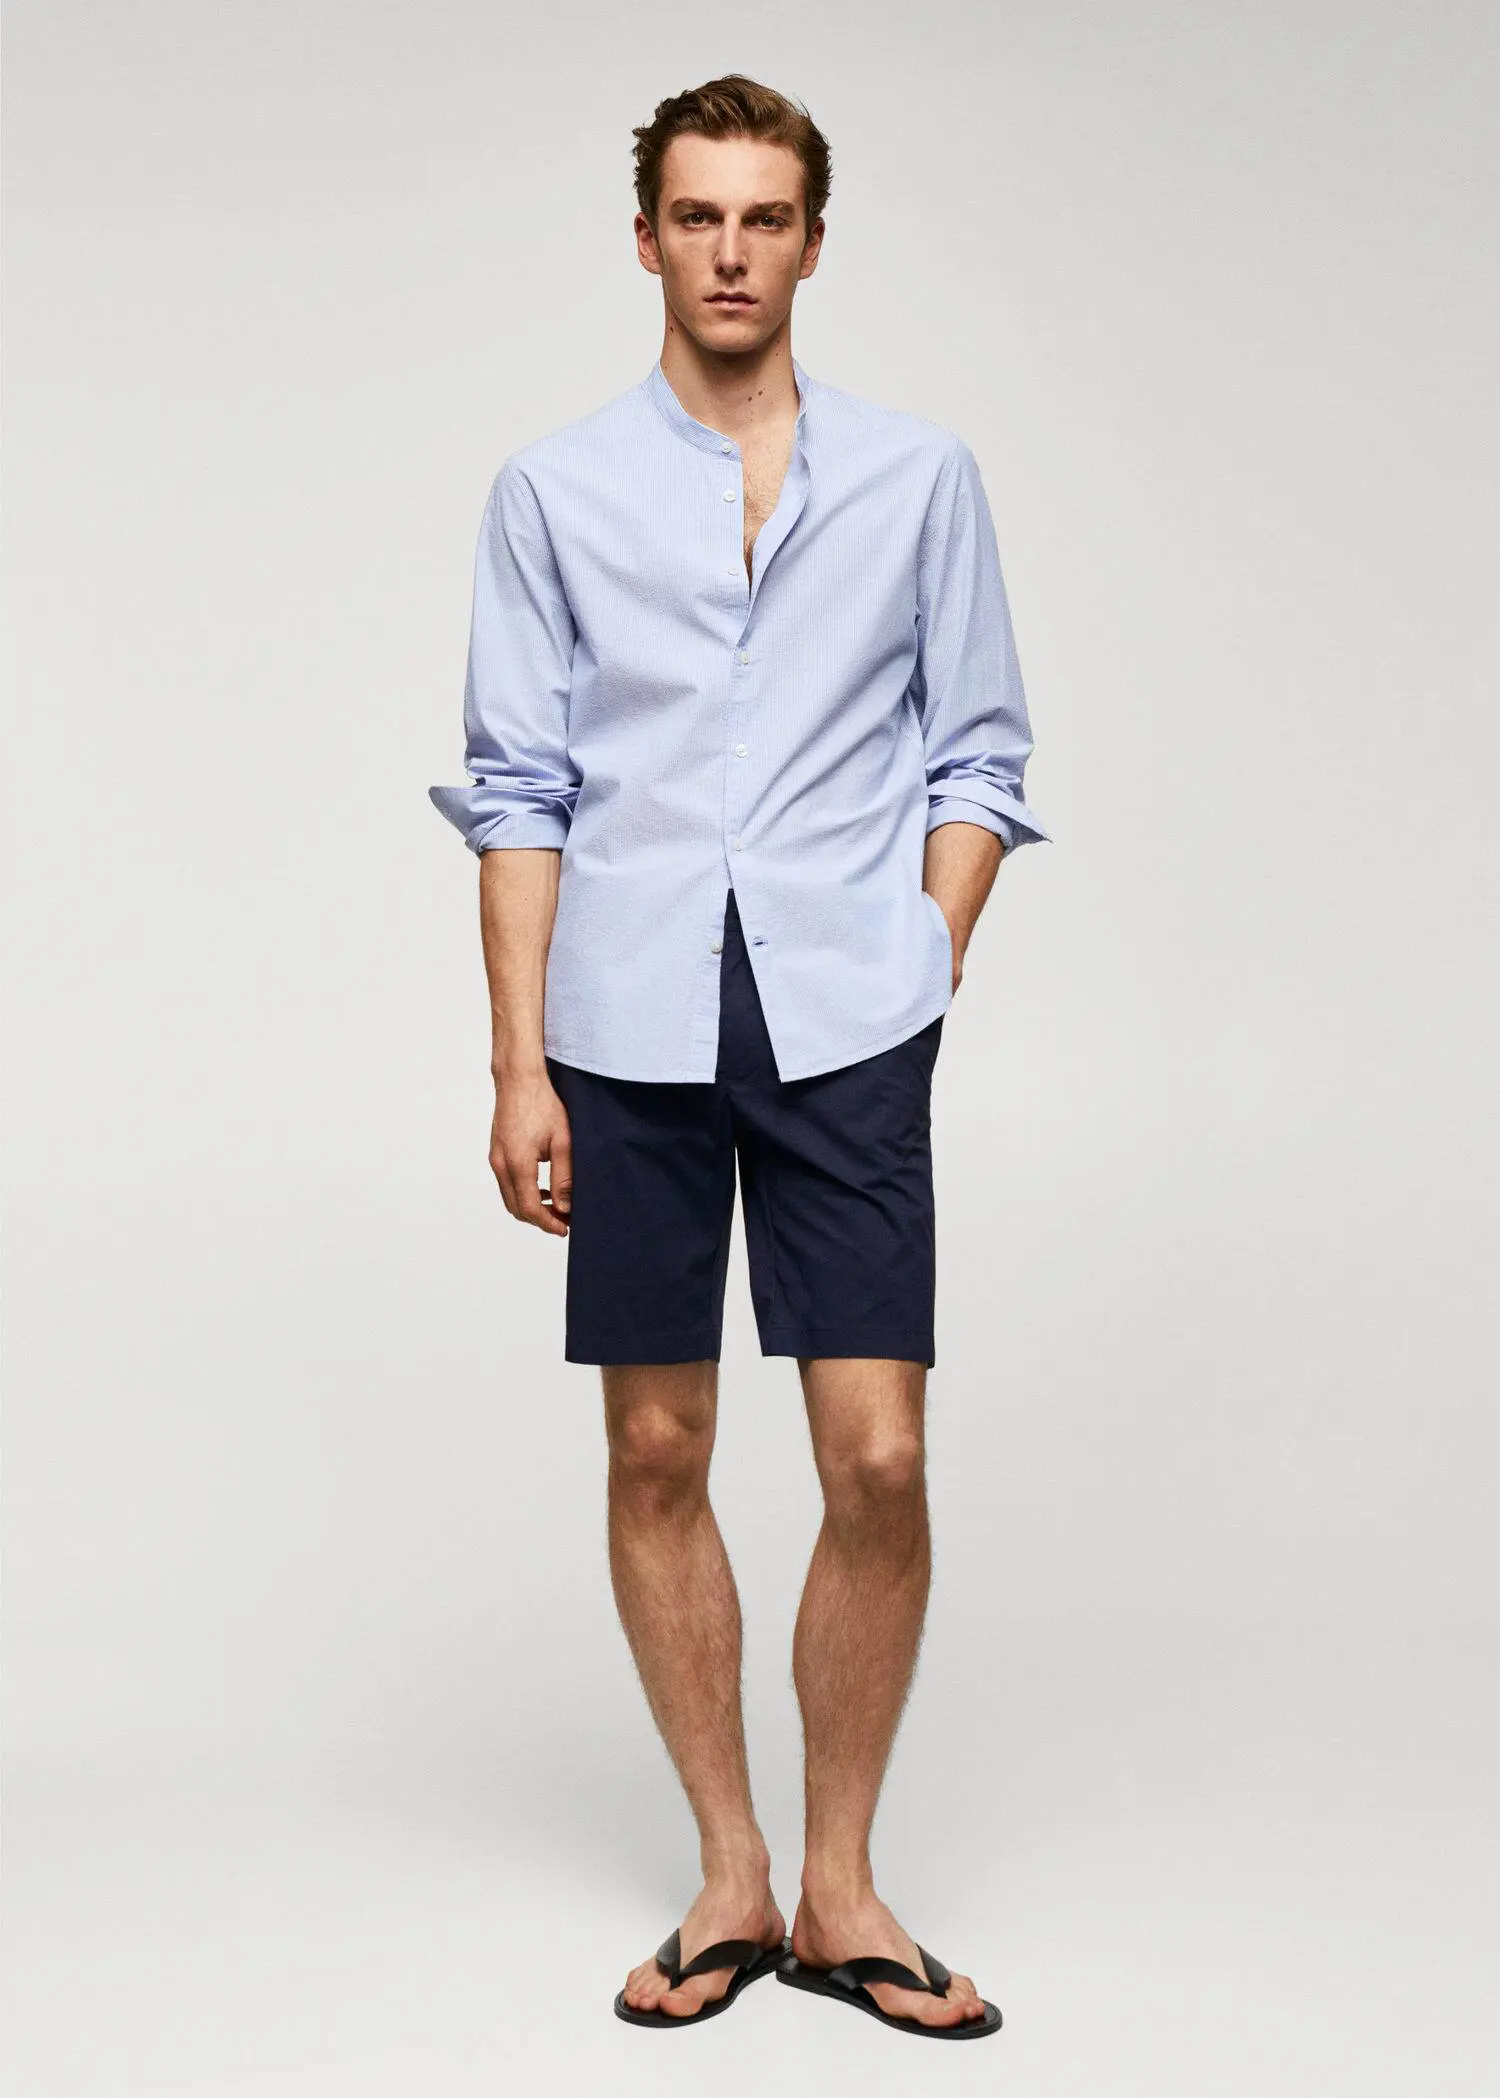 Mango Cotton seersucker shirt with multiple stripes. a man in a blue shirt and shorts. 